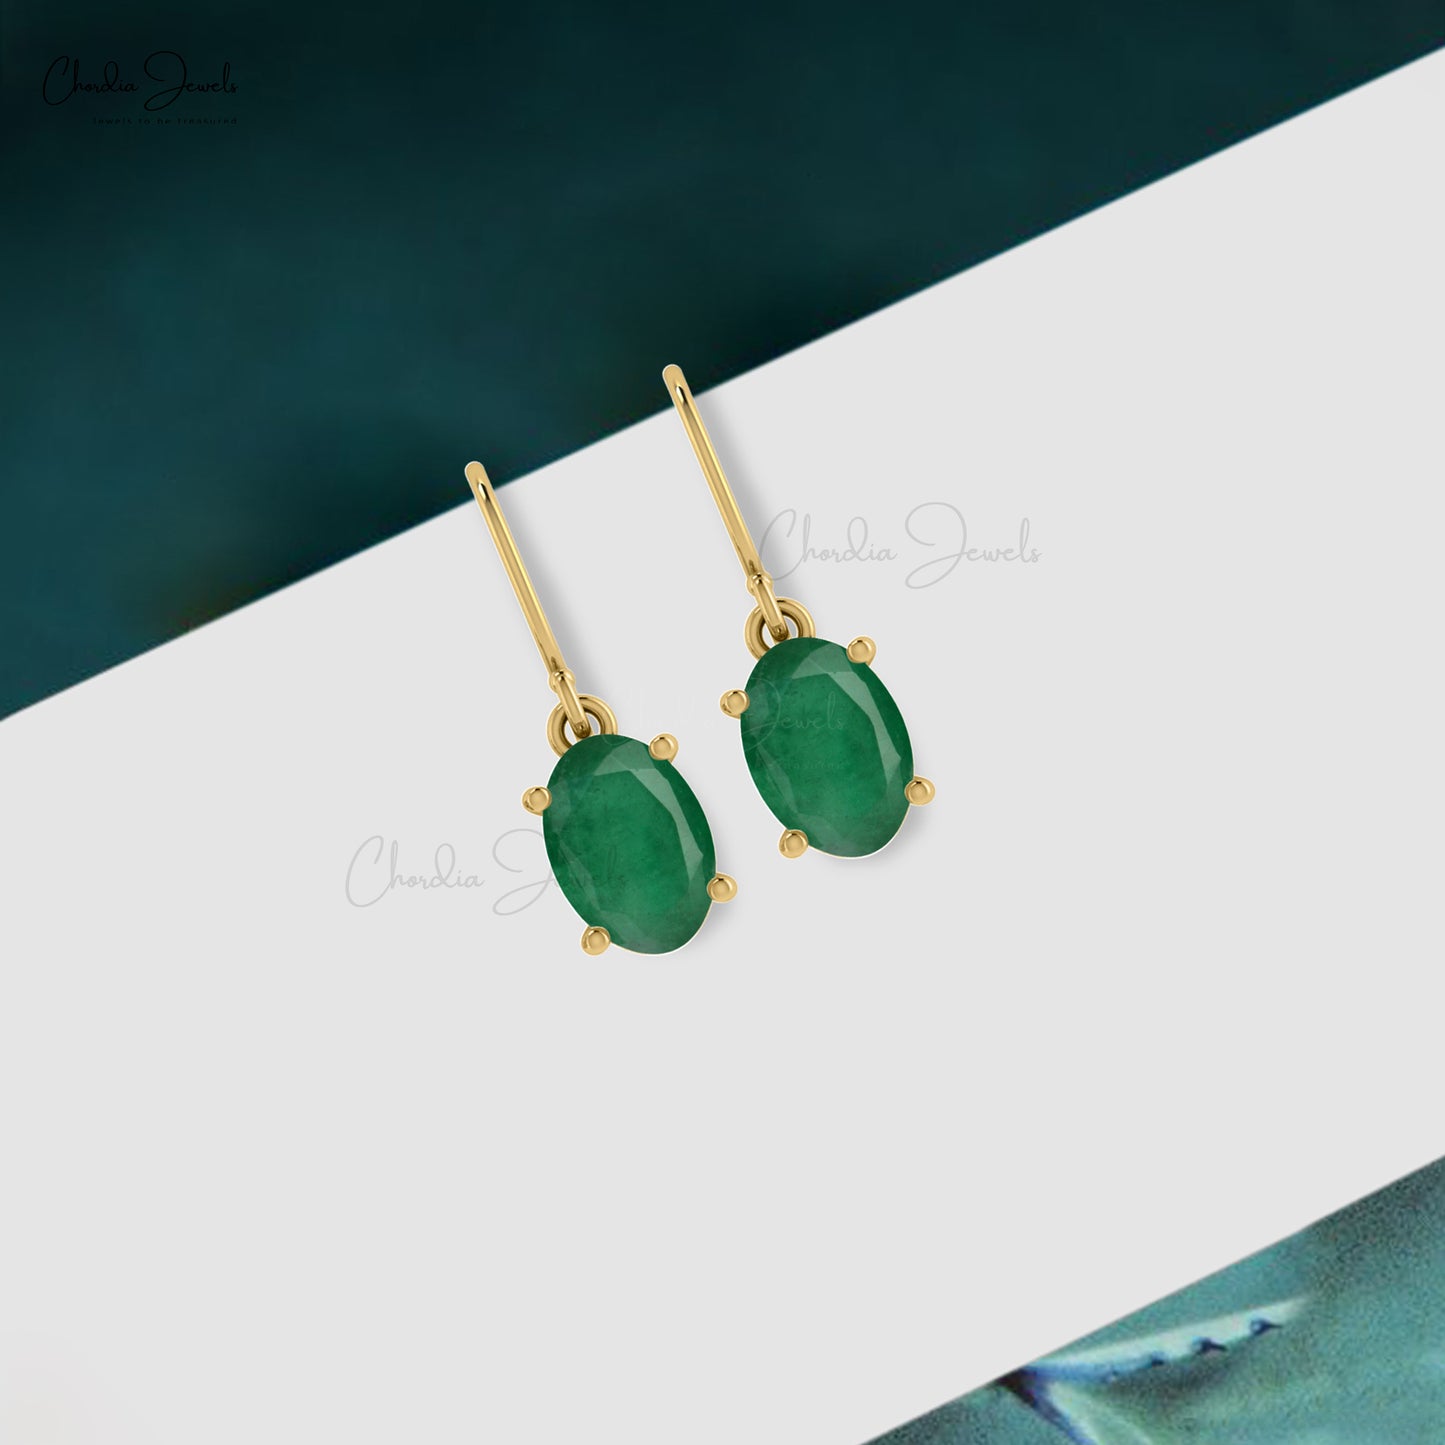 Load image into Gallery viewer, Natural Emerald Danglers Earrings 14k Real Gold Prong Set Fish Hook Earrings 7x5mm Oval Cut Gemstone Handmade Jewelry For Wedding Gift
